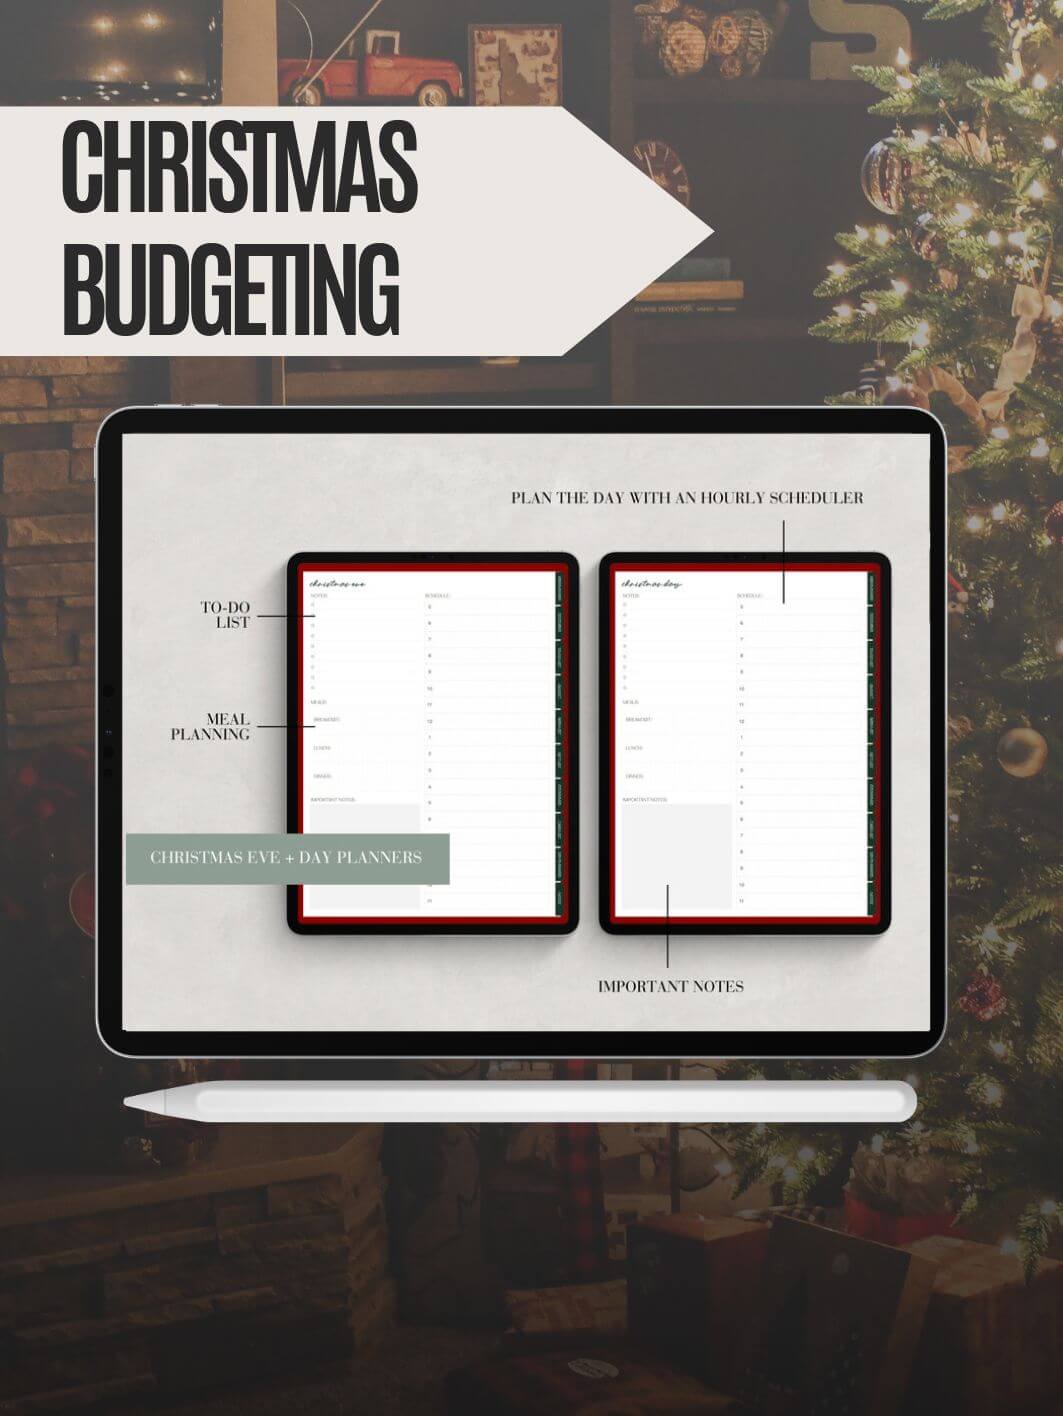 CHRISTMAS GOODNOTES PLANNER Becca.Q